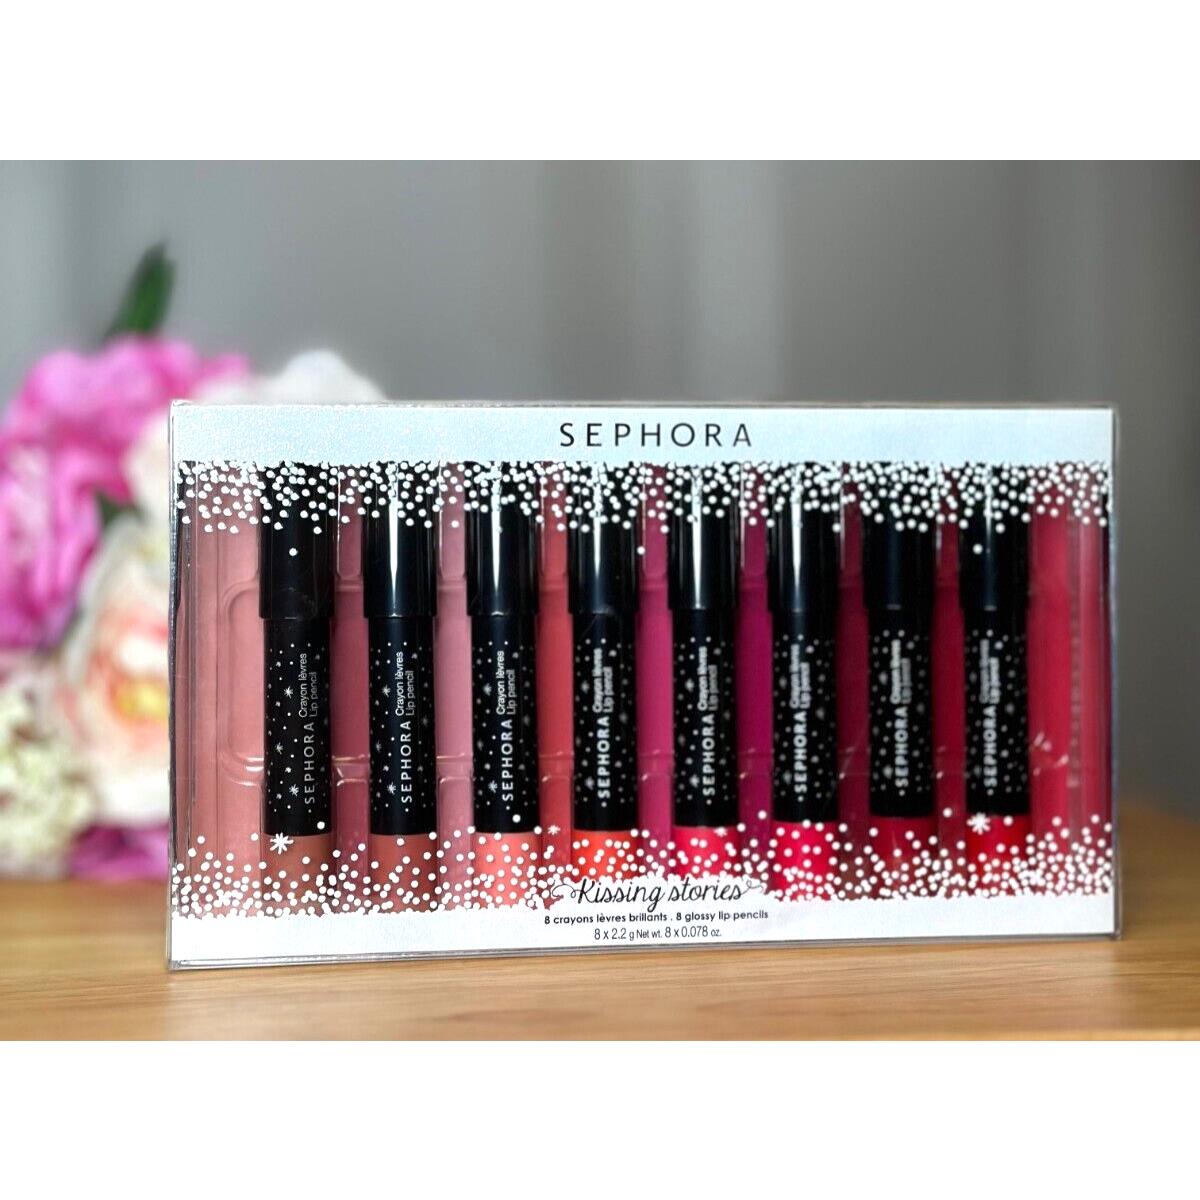 Sephora Kissing Stories Collection 8 Glossy Lip Pencils Gift Set 8 x 0.078 oz